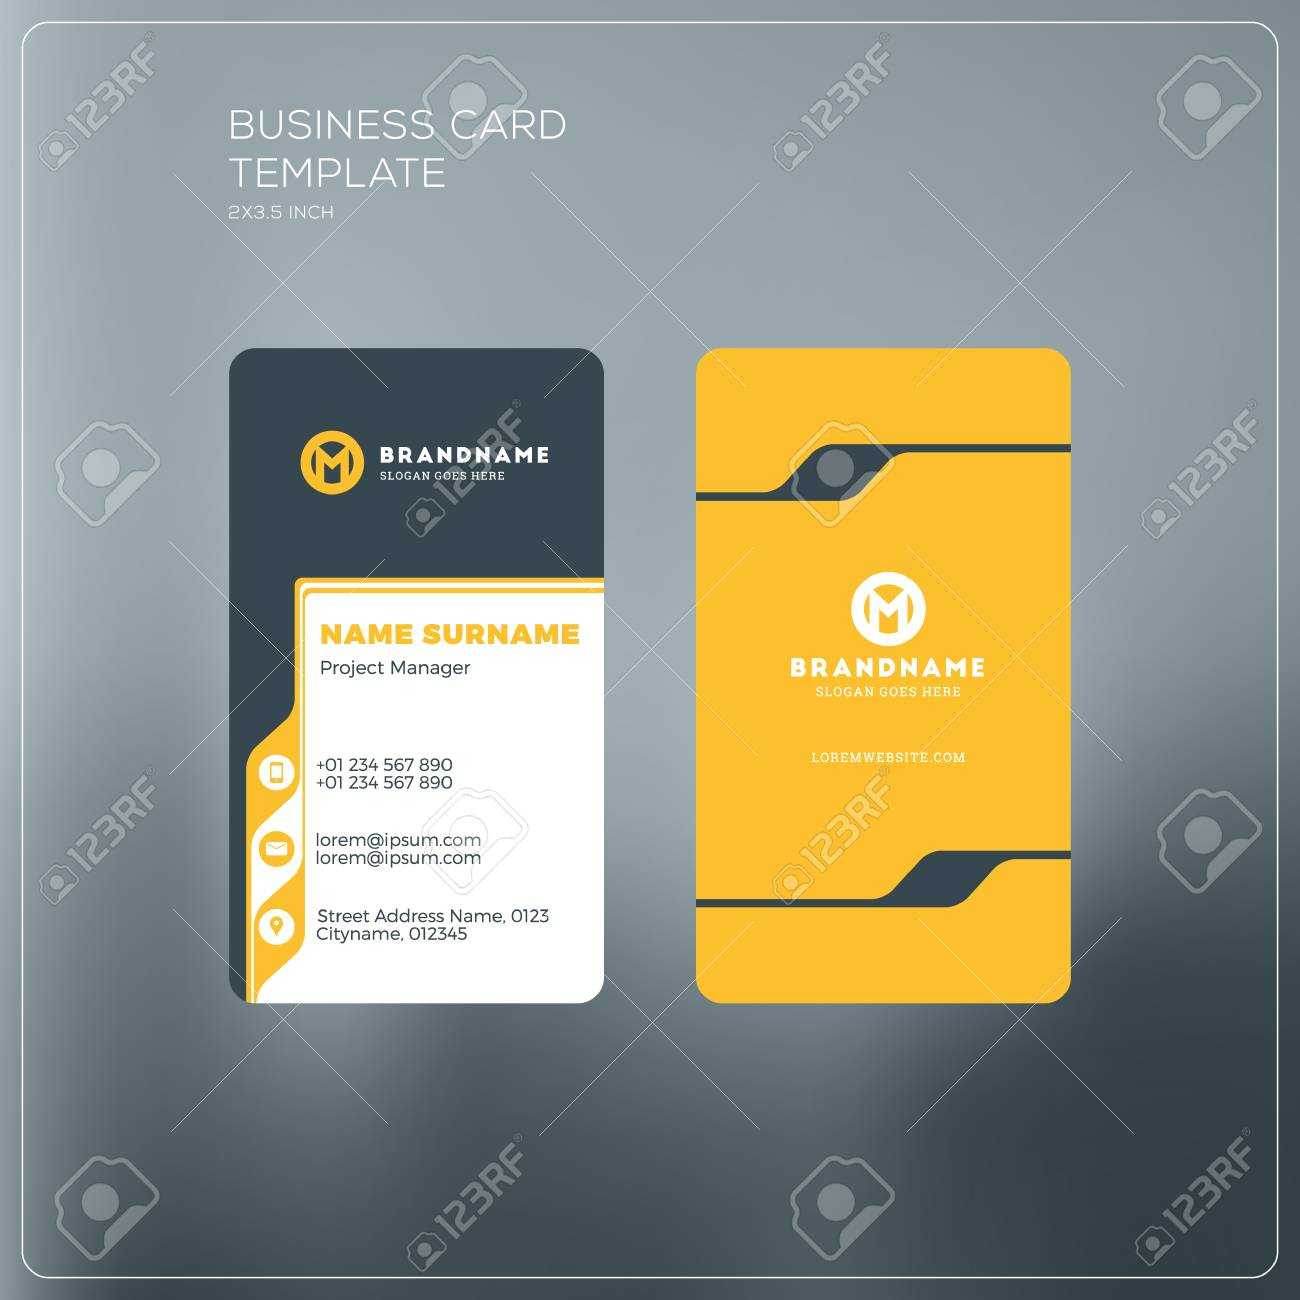 Personal Business Cards Template Inside Pages Business Card Template